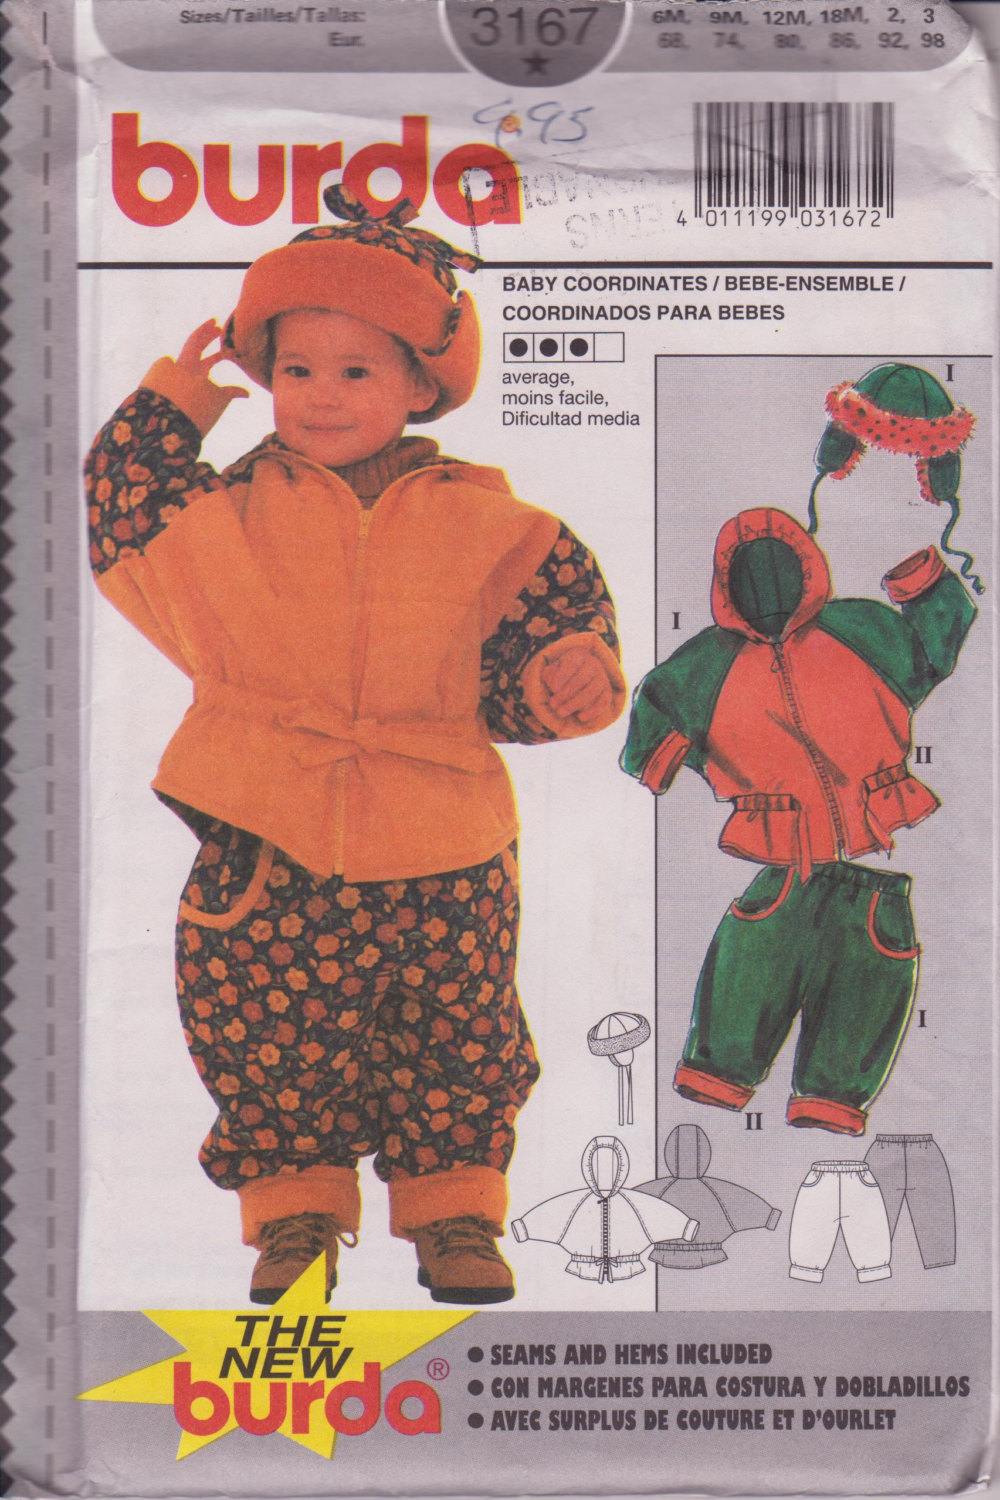 Burda 3167 Baby Coordinates Sizes 6 months to 3 years Eur 68-98 Jacket with Hat - $11.00